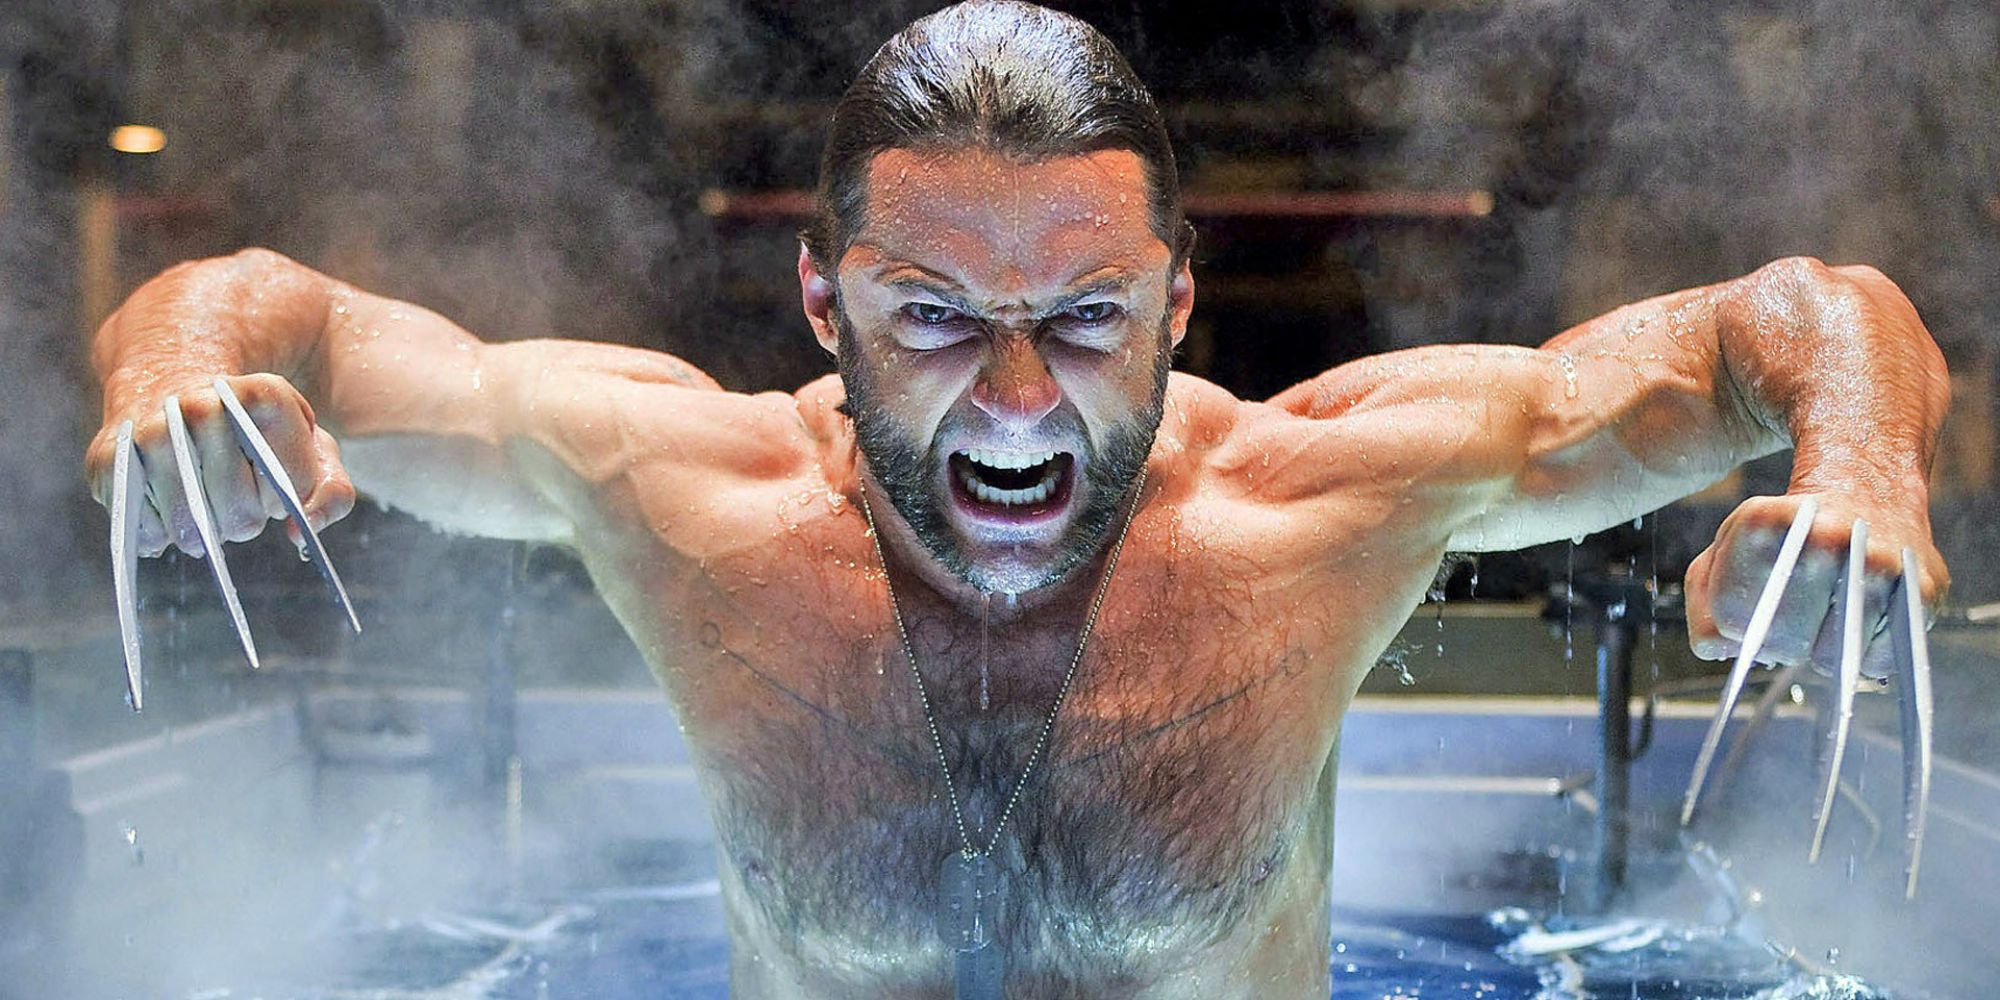 Hugh Jackman as Logan emerging from a tank of water with his claws drawn